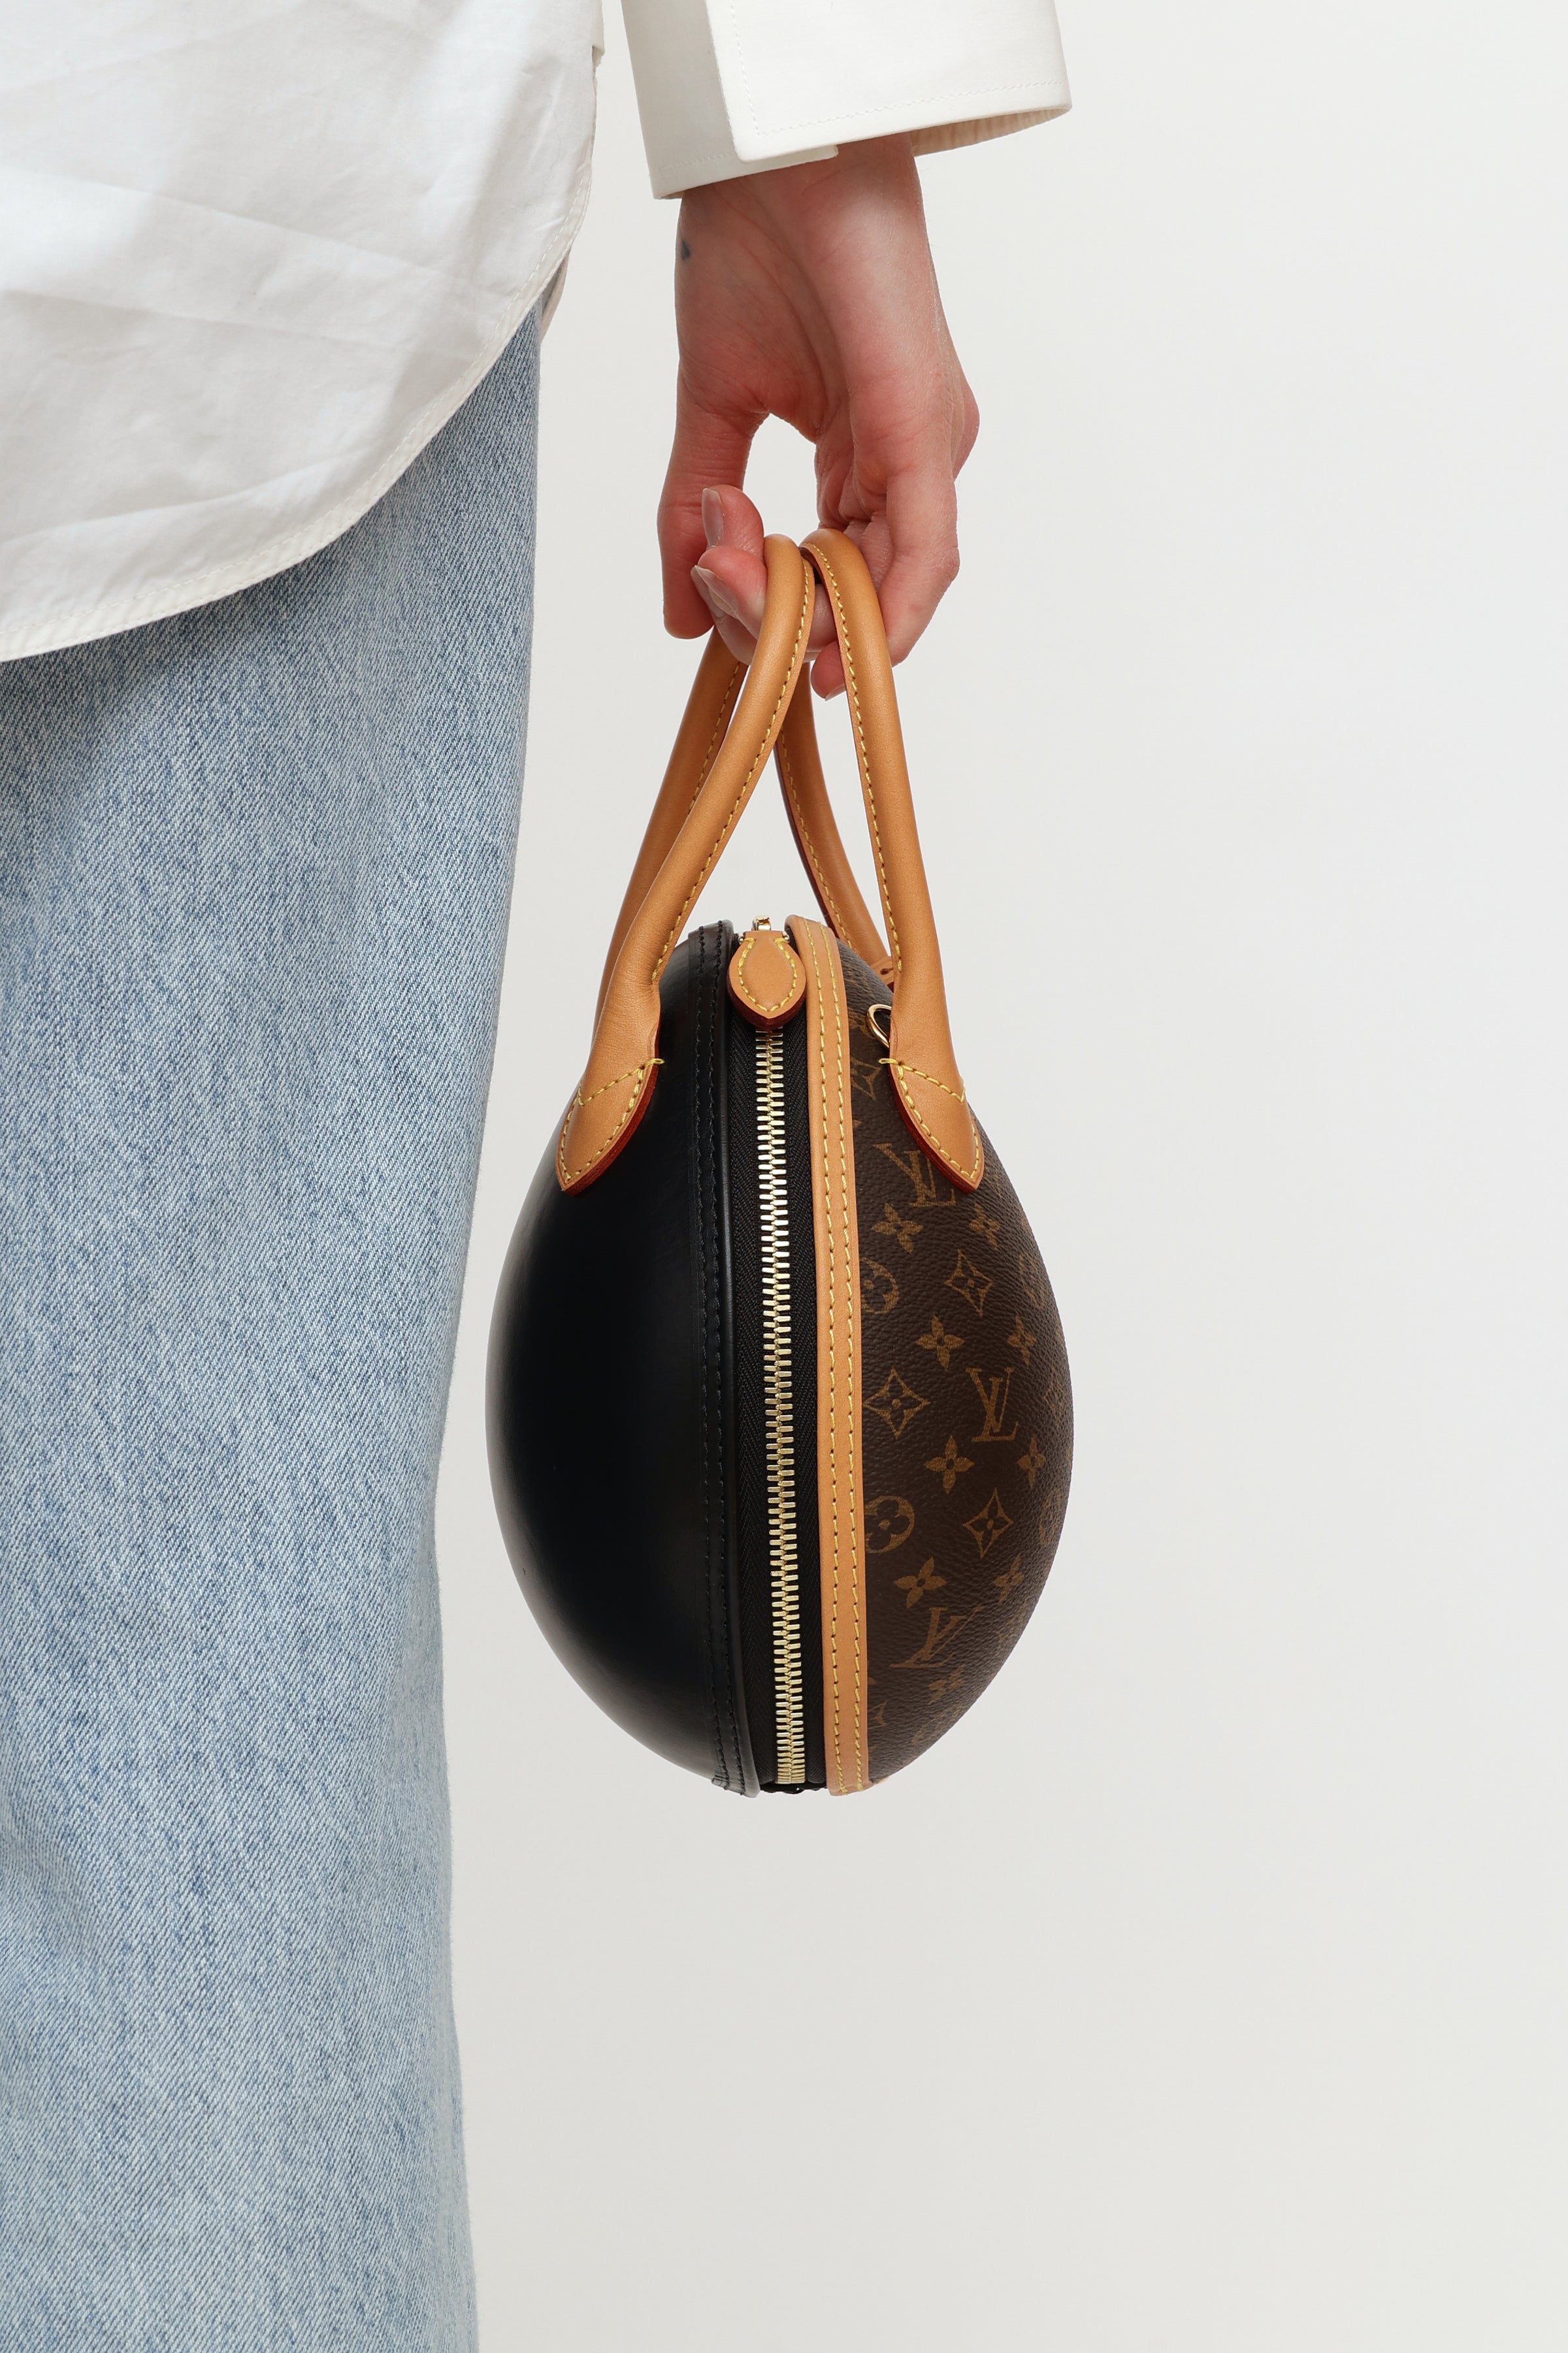 Louis Vuitton Egg - For Sale on 1stDibs